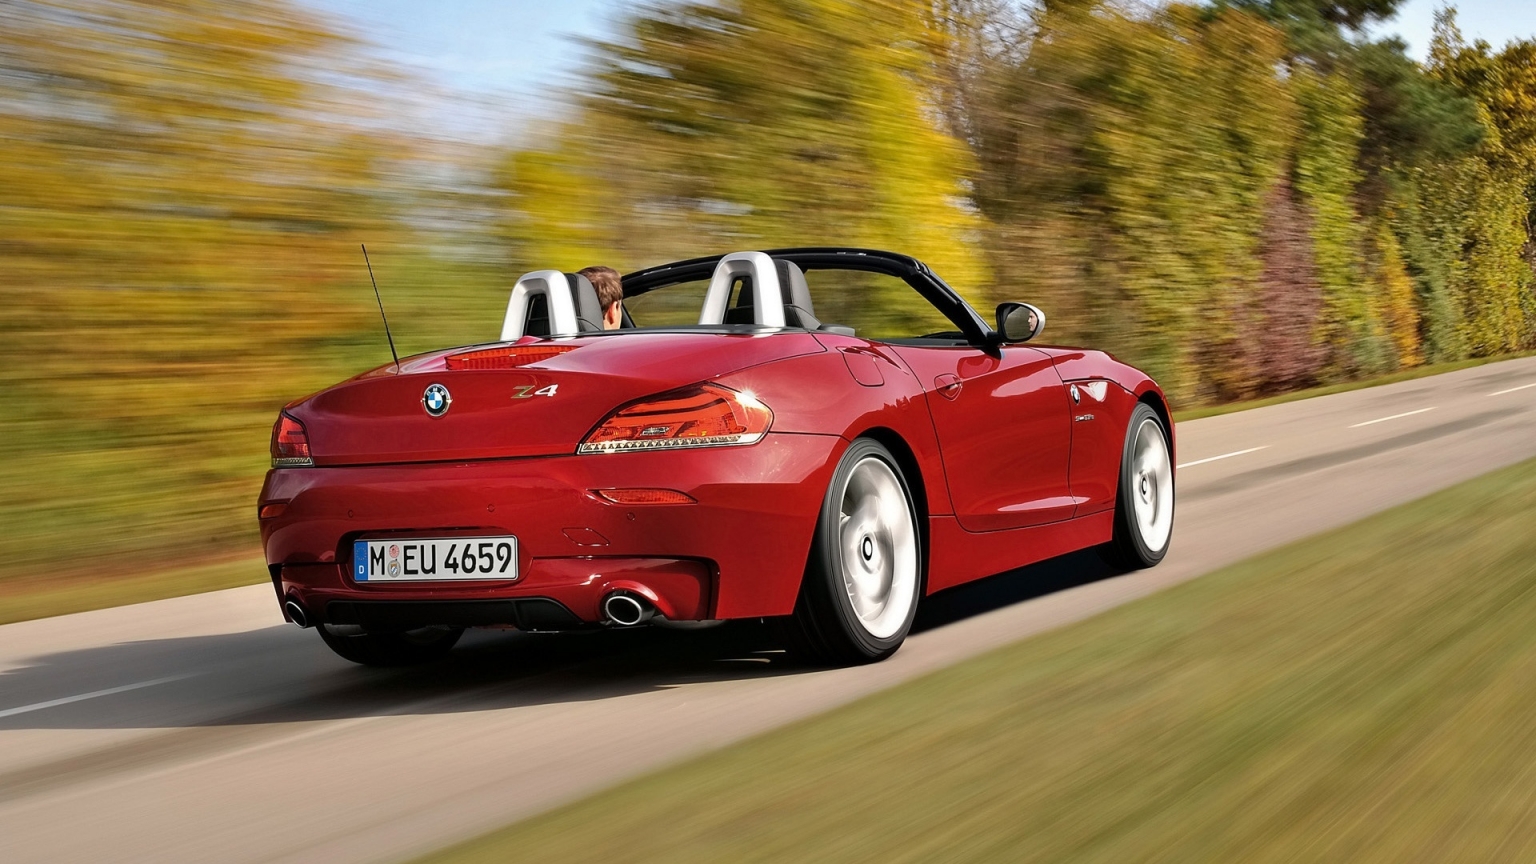 BMW Z4 sDrive35is Rear 2010 for 1536 x 864 HDTV resolution